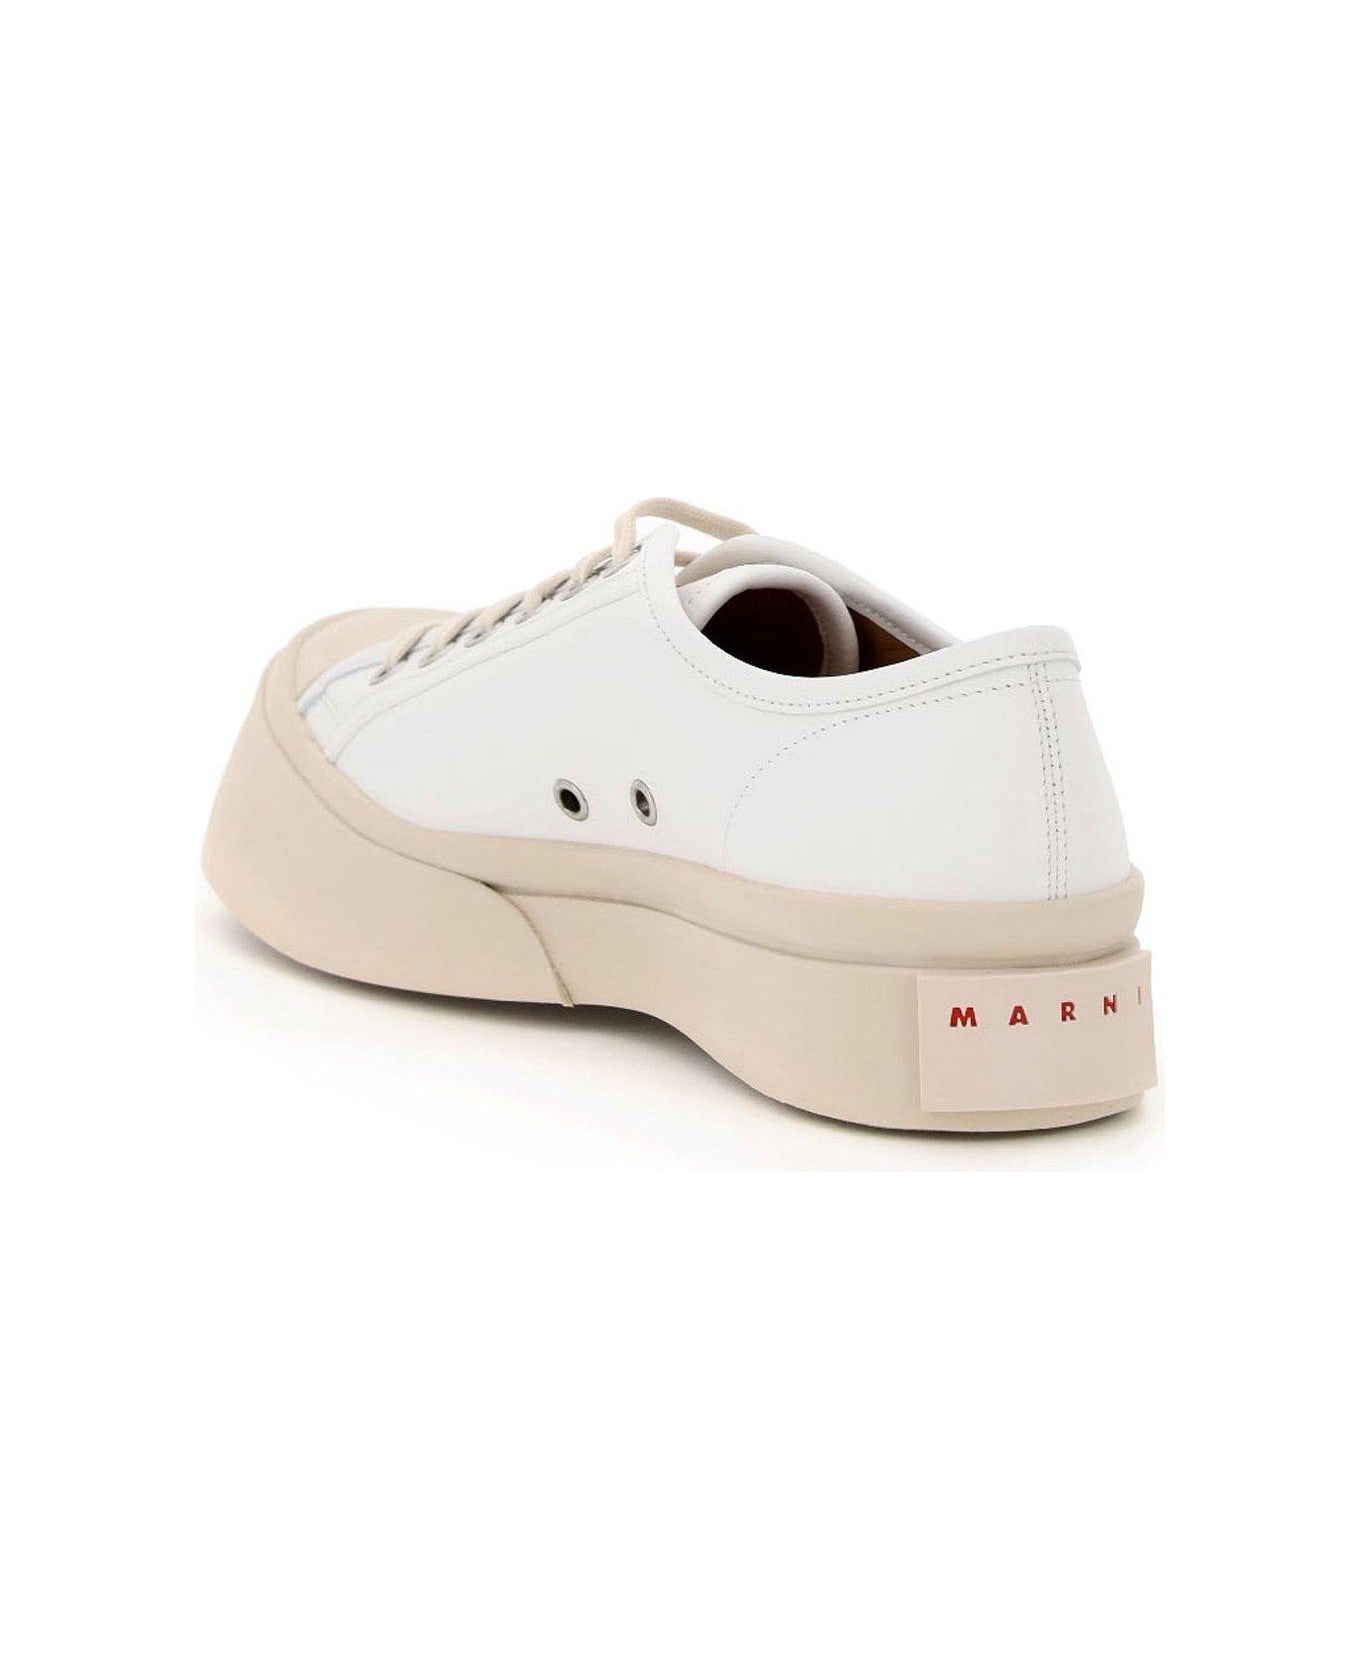 Marni Pablo Chunky Sole Sneakers - WHITE スニーカー